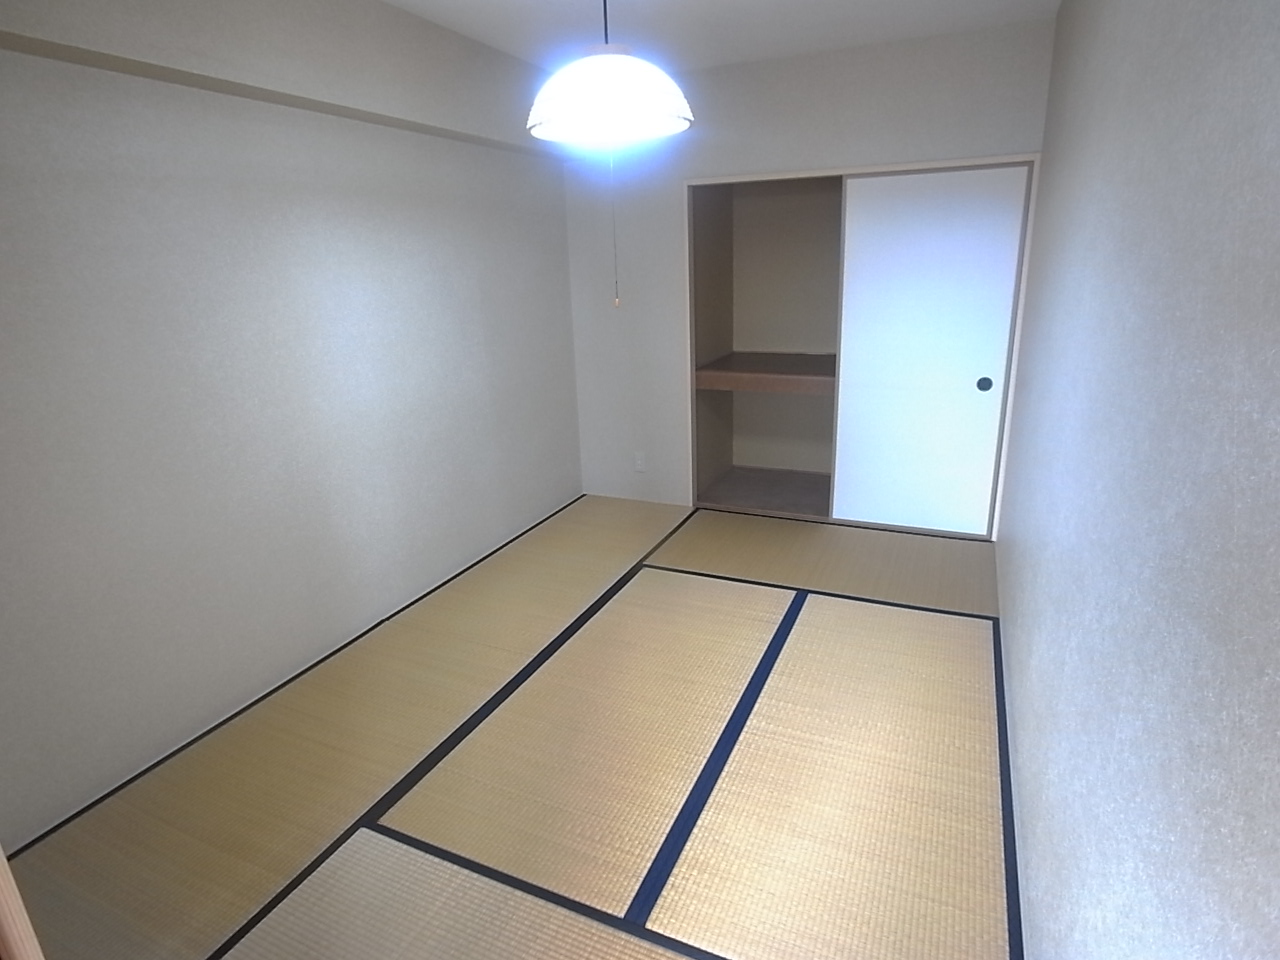 Other room space. Japanese-style room 6 quires ☆ In the bedroom here is the person who futon school